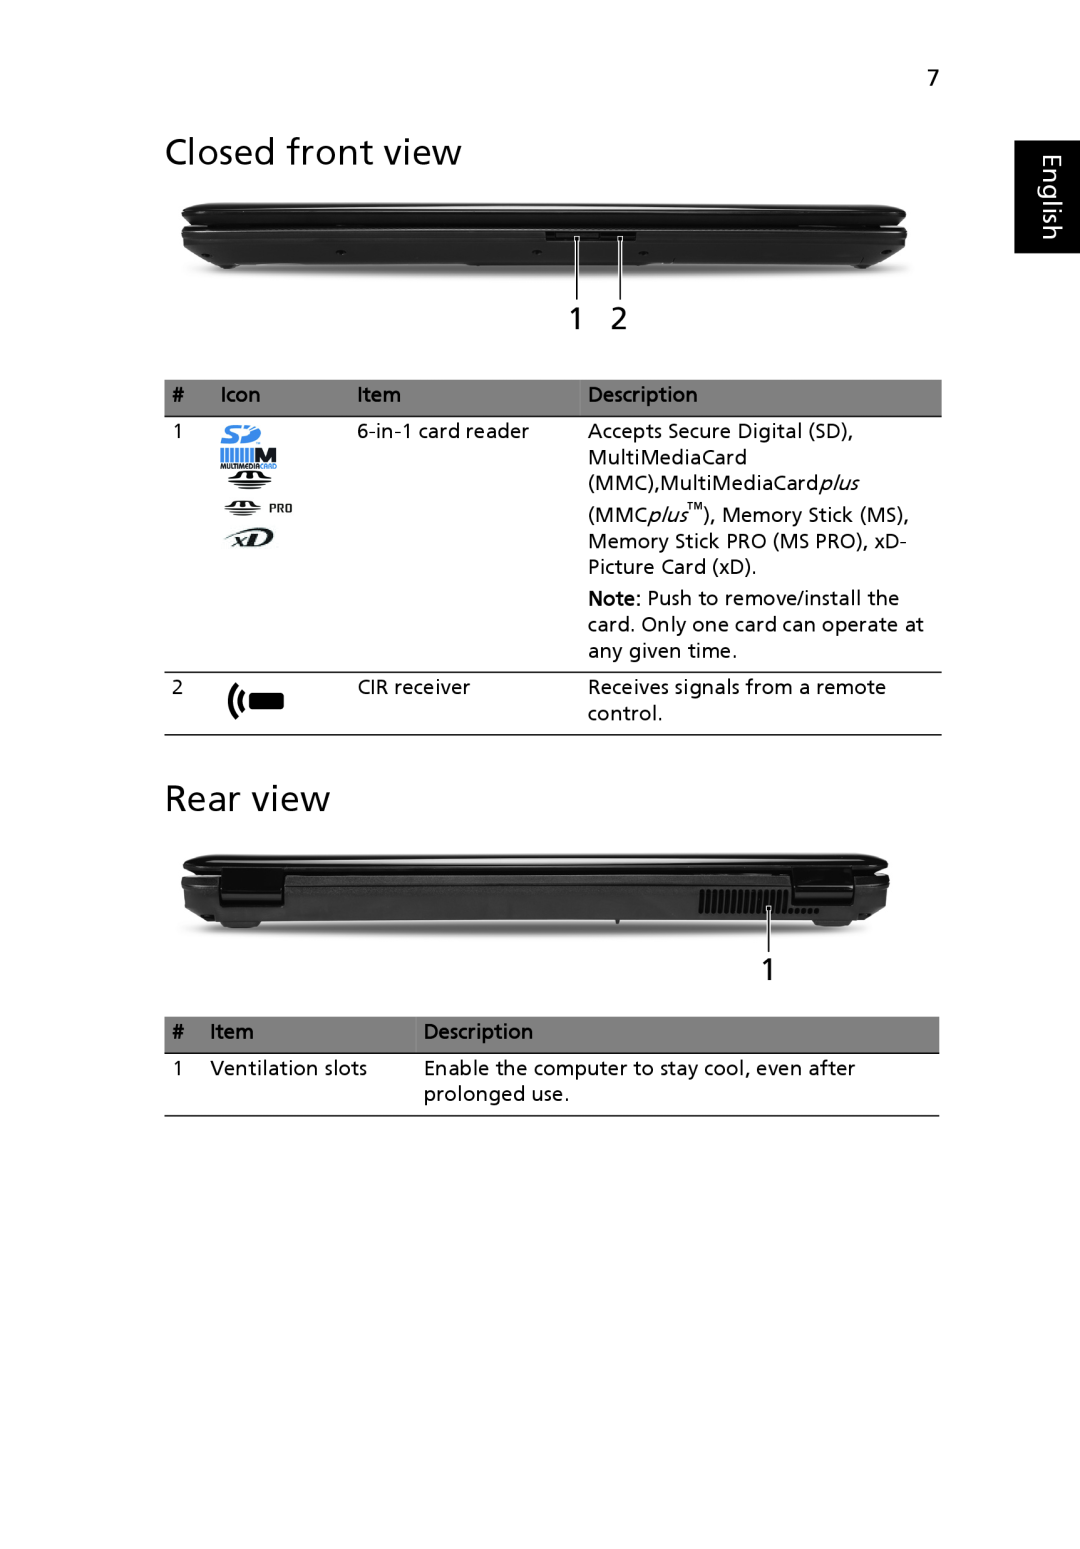 Acer 8735Z manual Closed front view, Rear view, English, # Icon, Description 